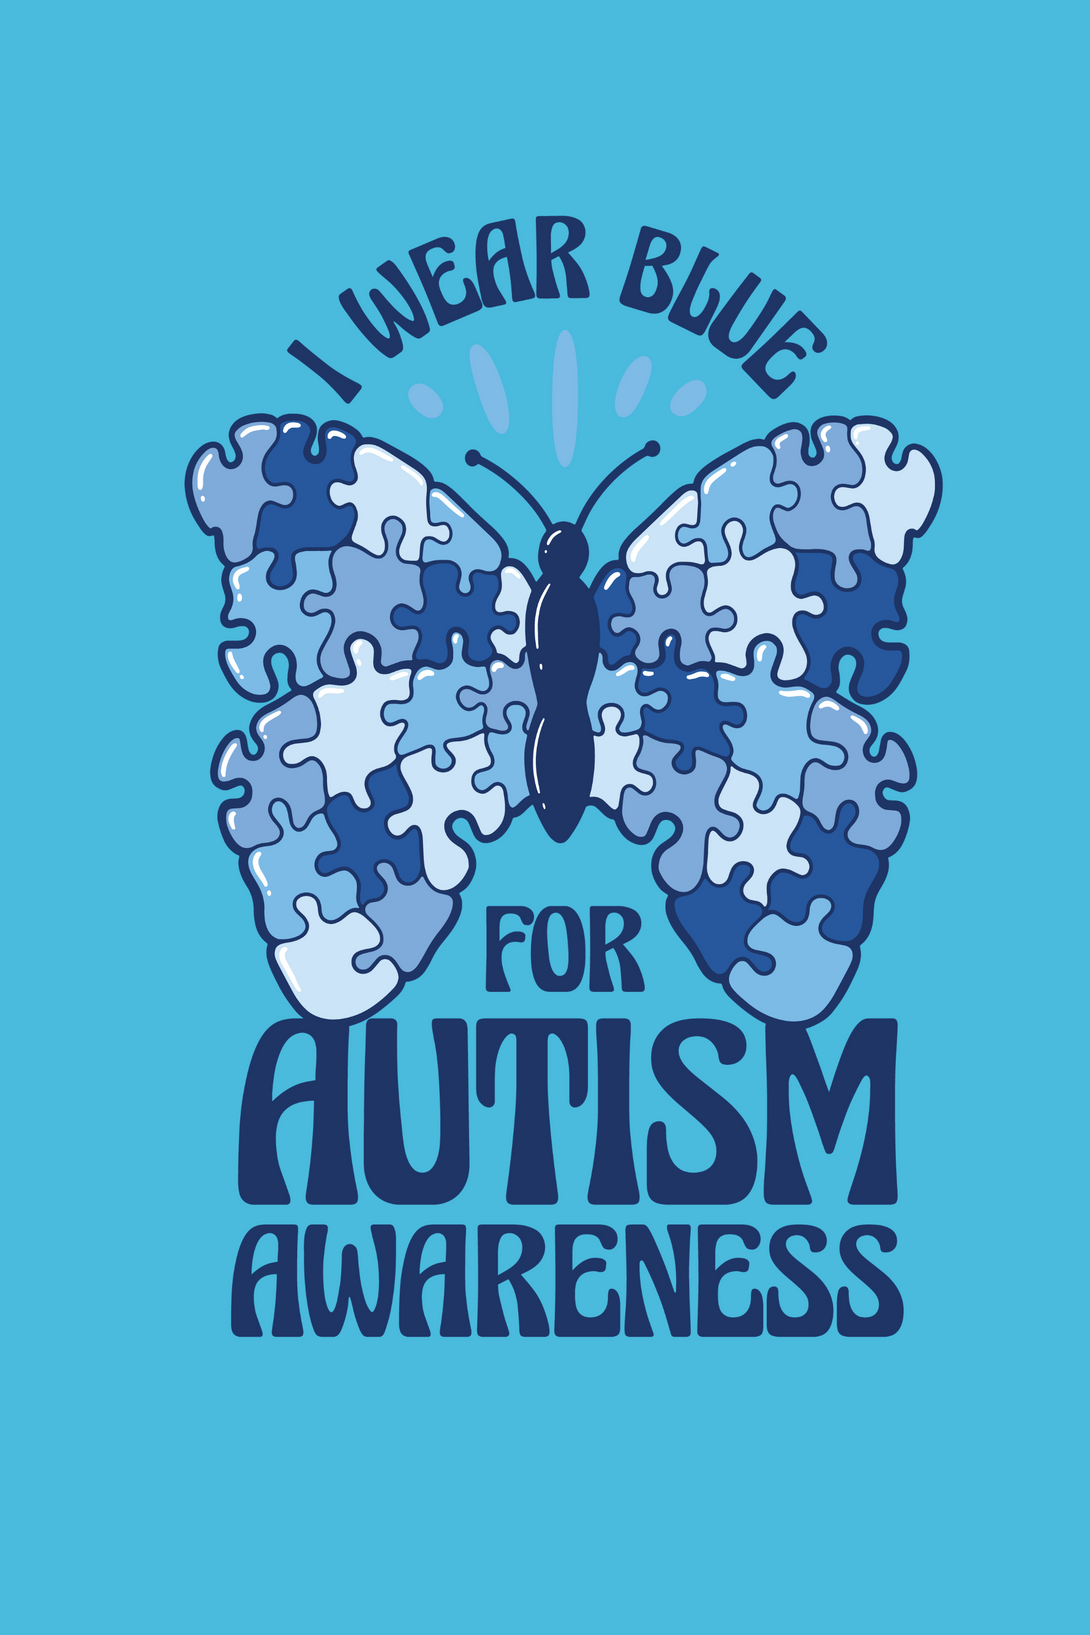 Autism Awareness Puzzle Skyblue Printed T-Shirt For Men - WowWaves - 1